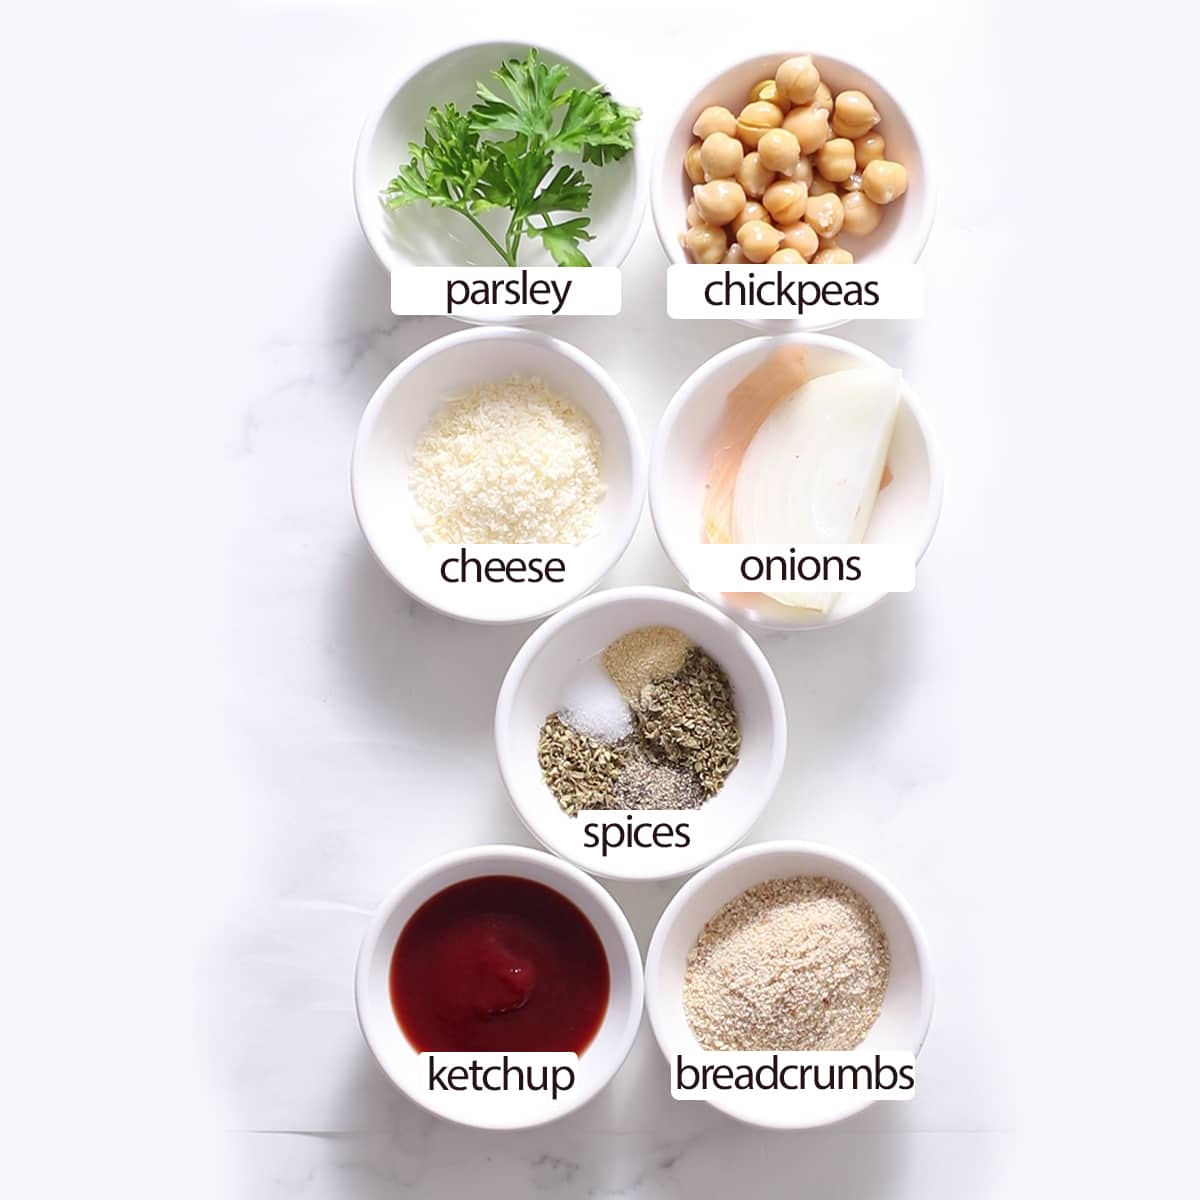 chickpea meatball ingredients.